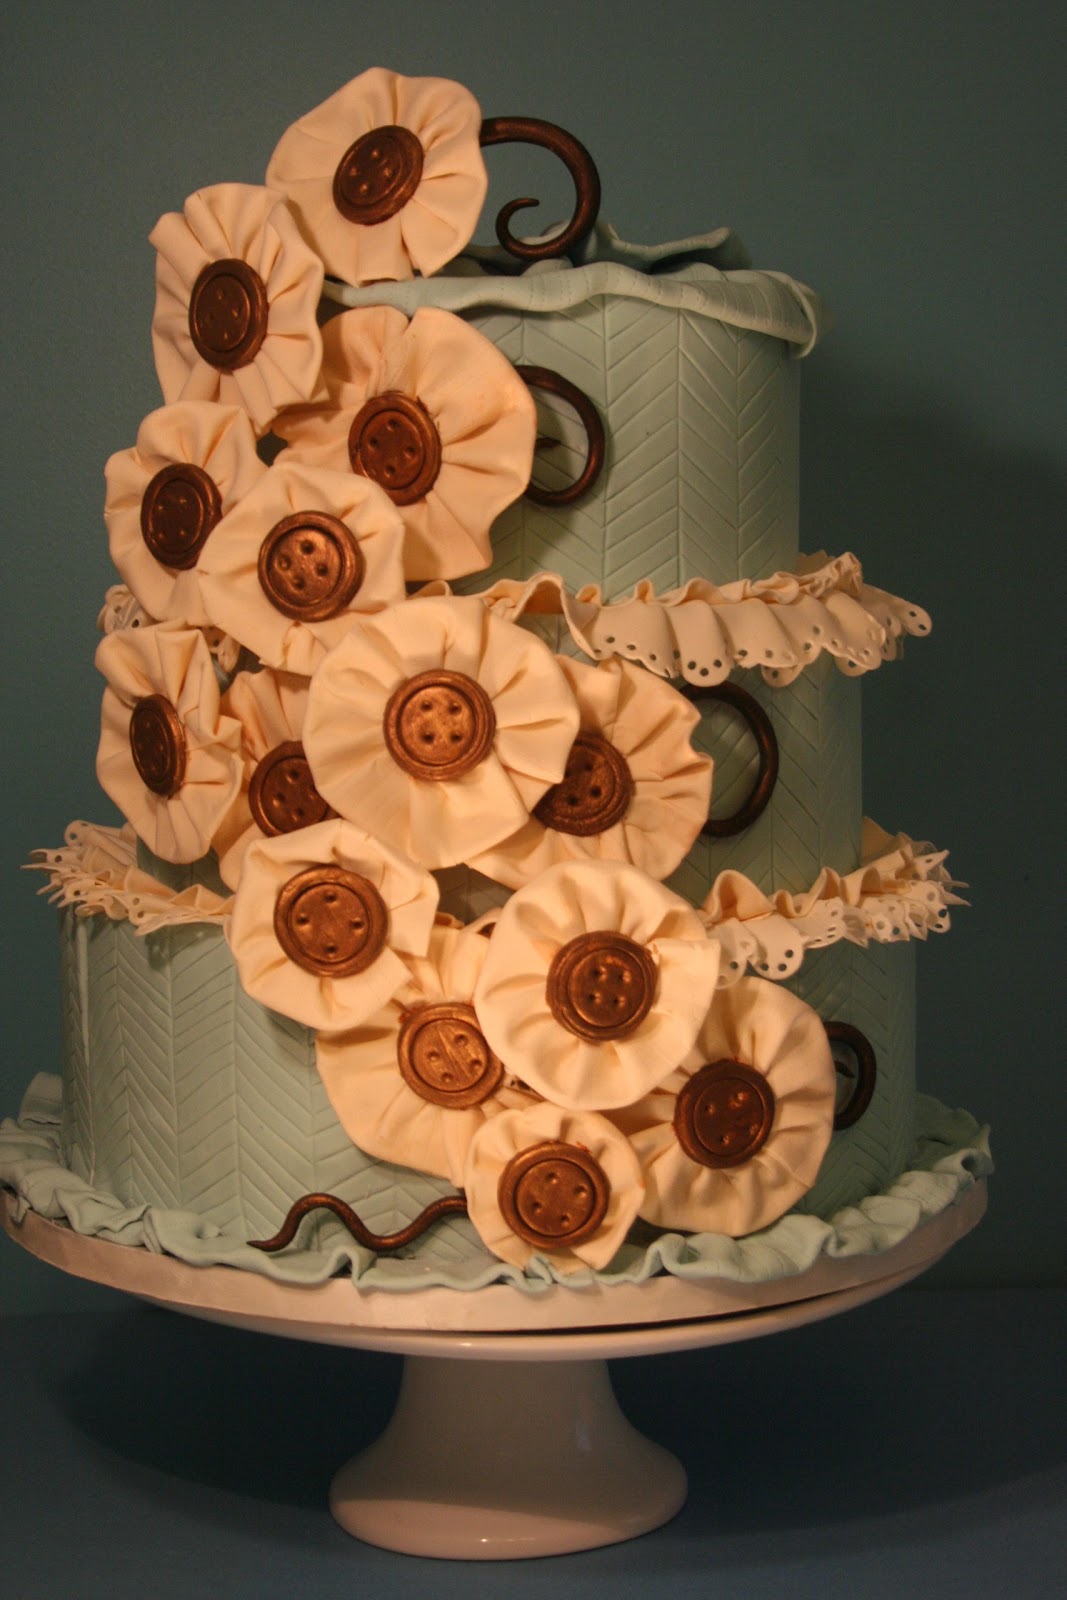 Courthouse Cake Company in